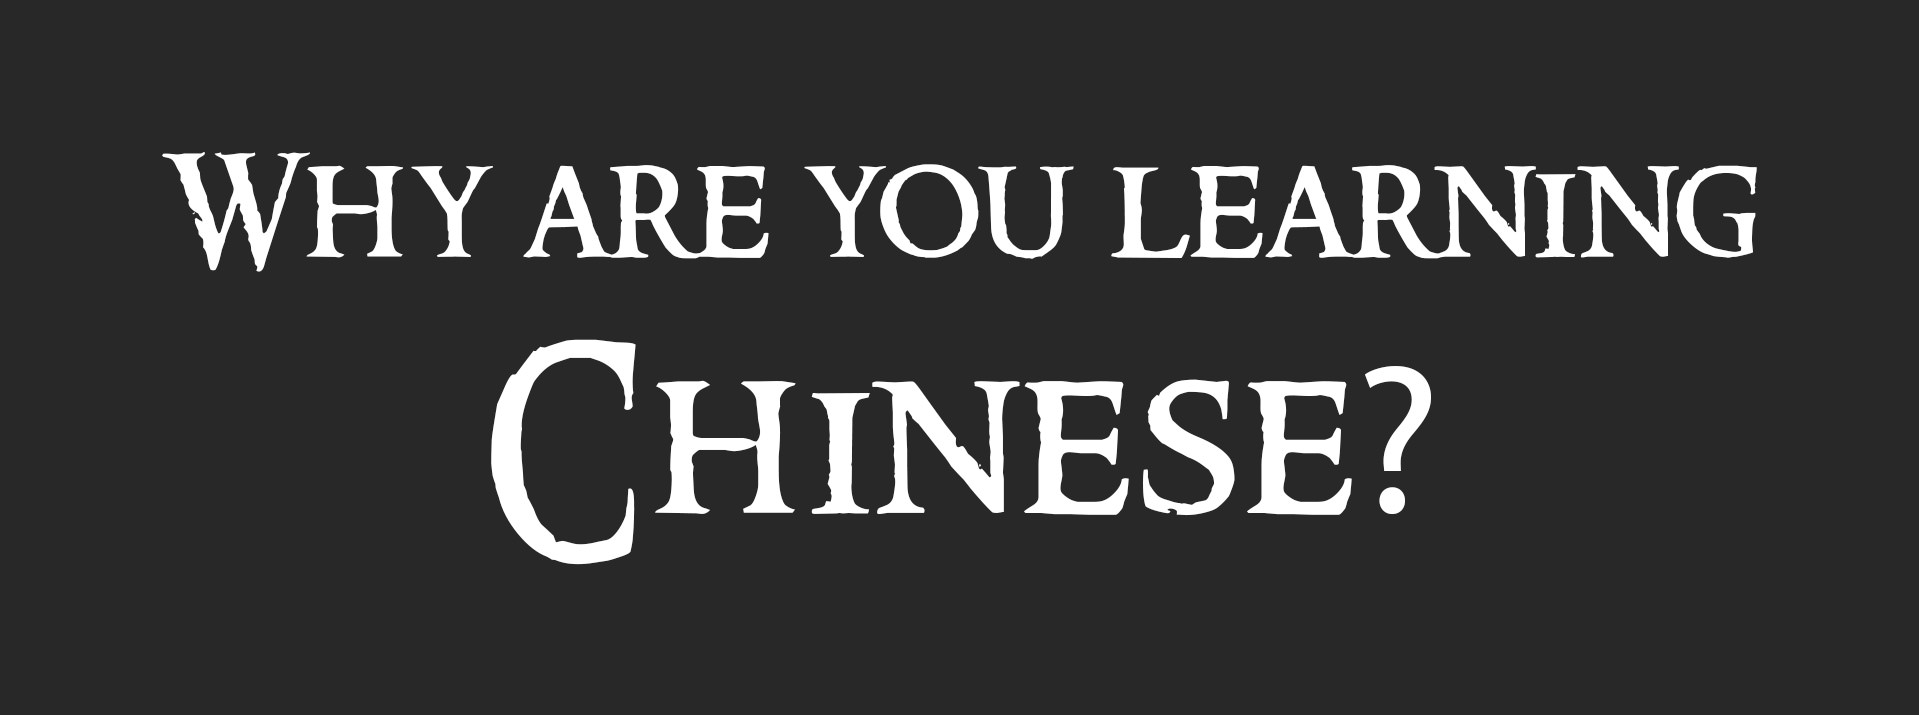 A graphic asks why are you learning Chinese